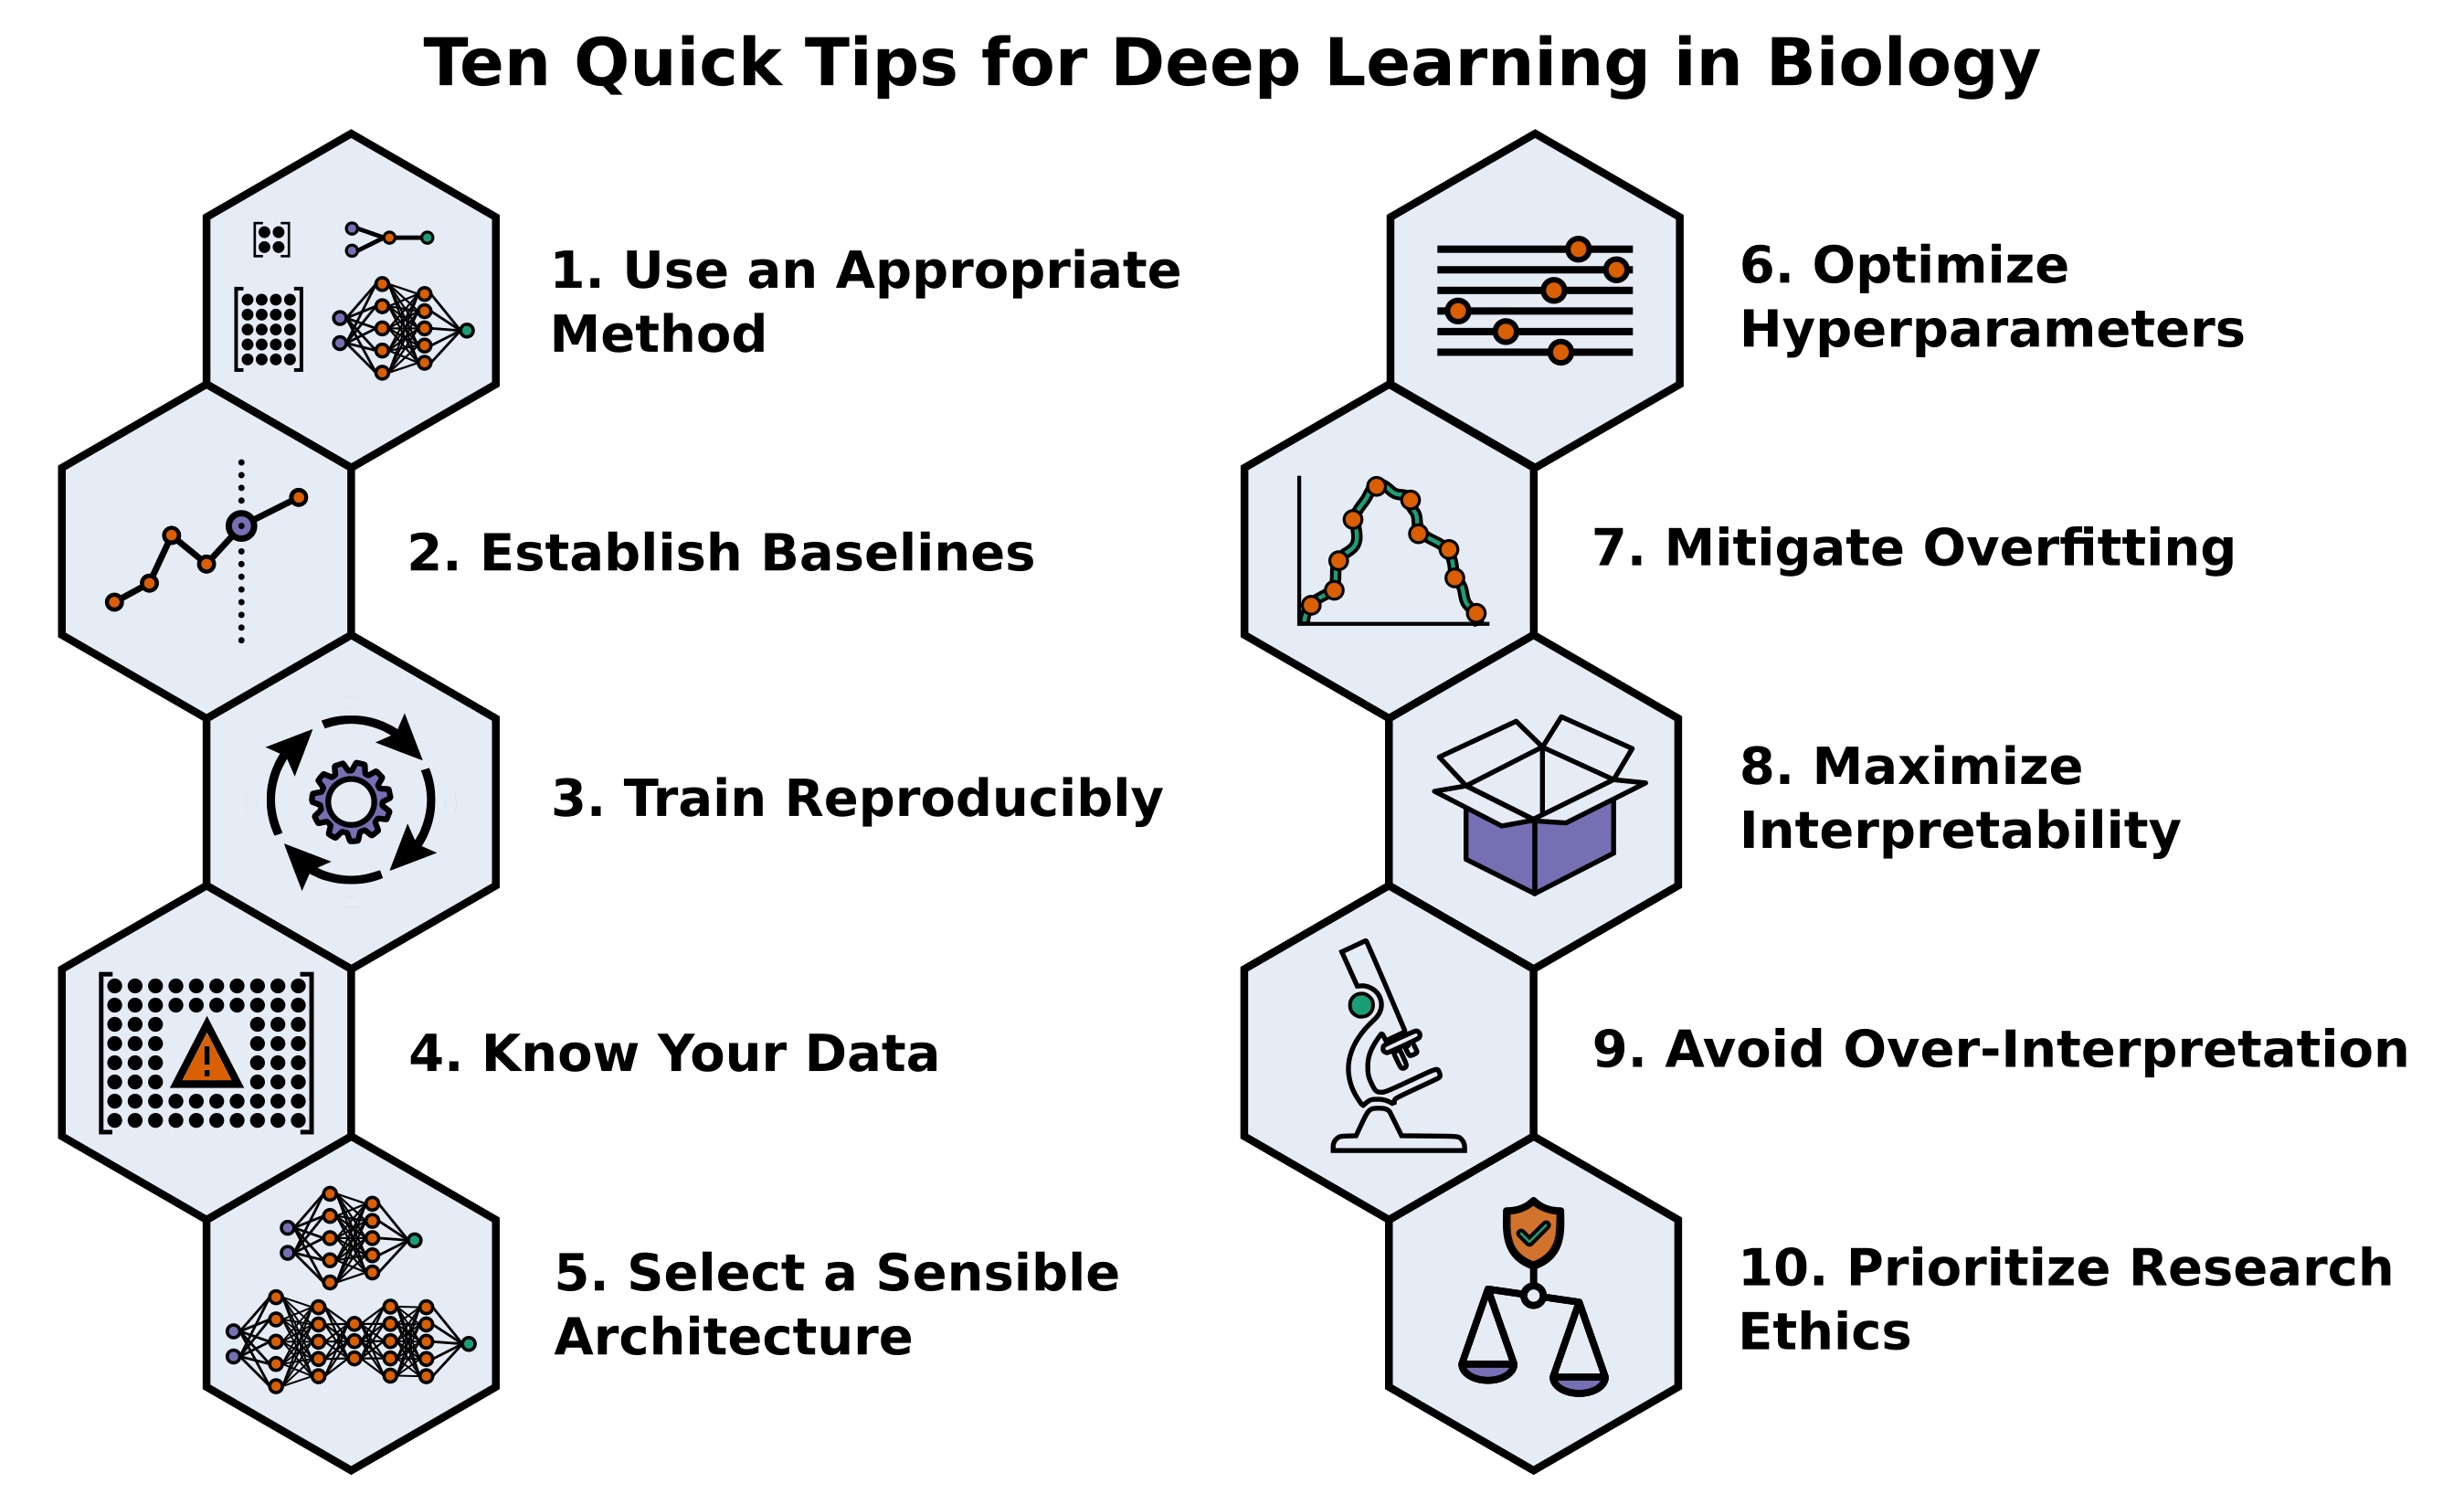 Ten Quick Tips for Deep Learning in Biology